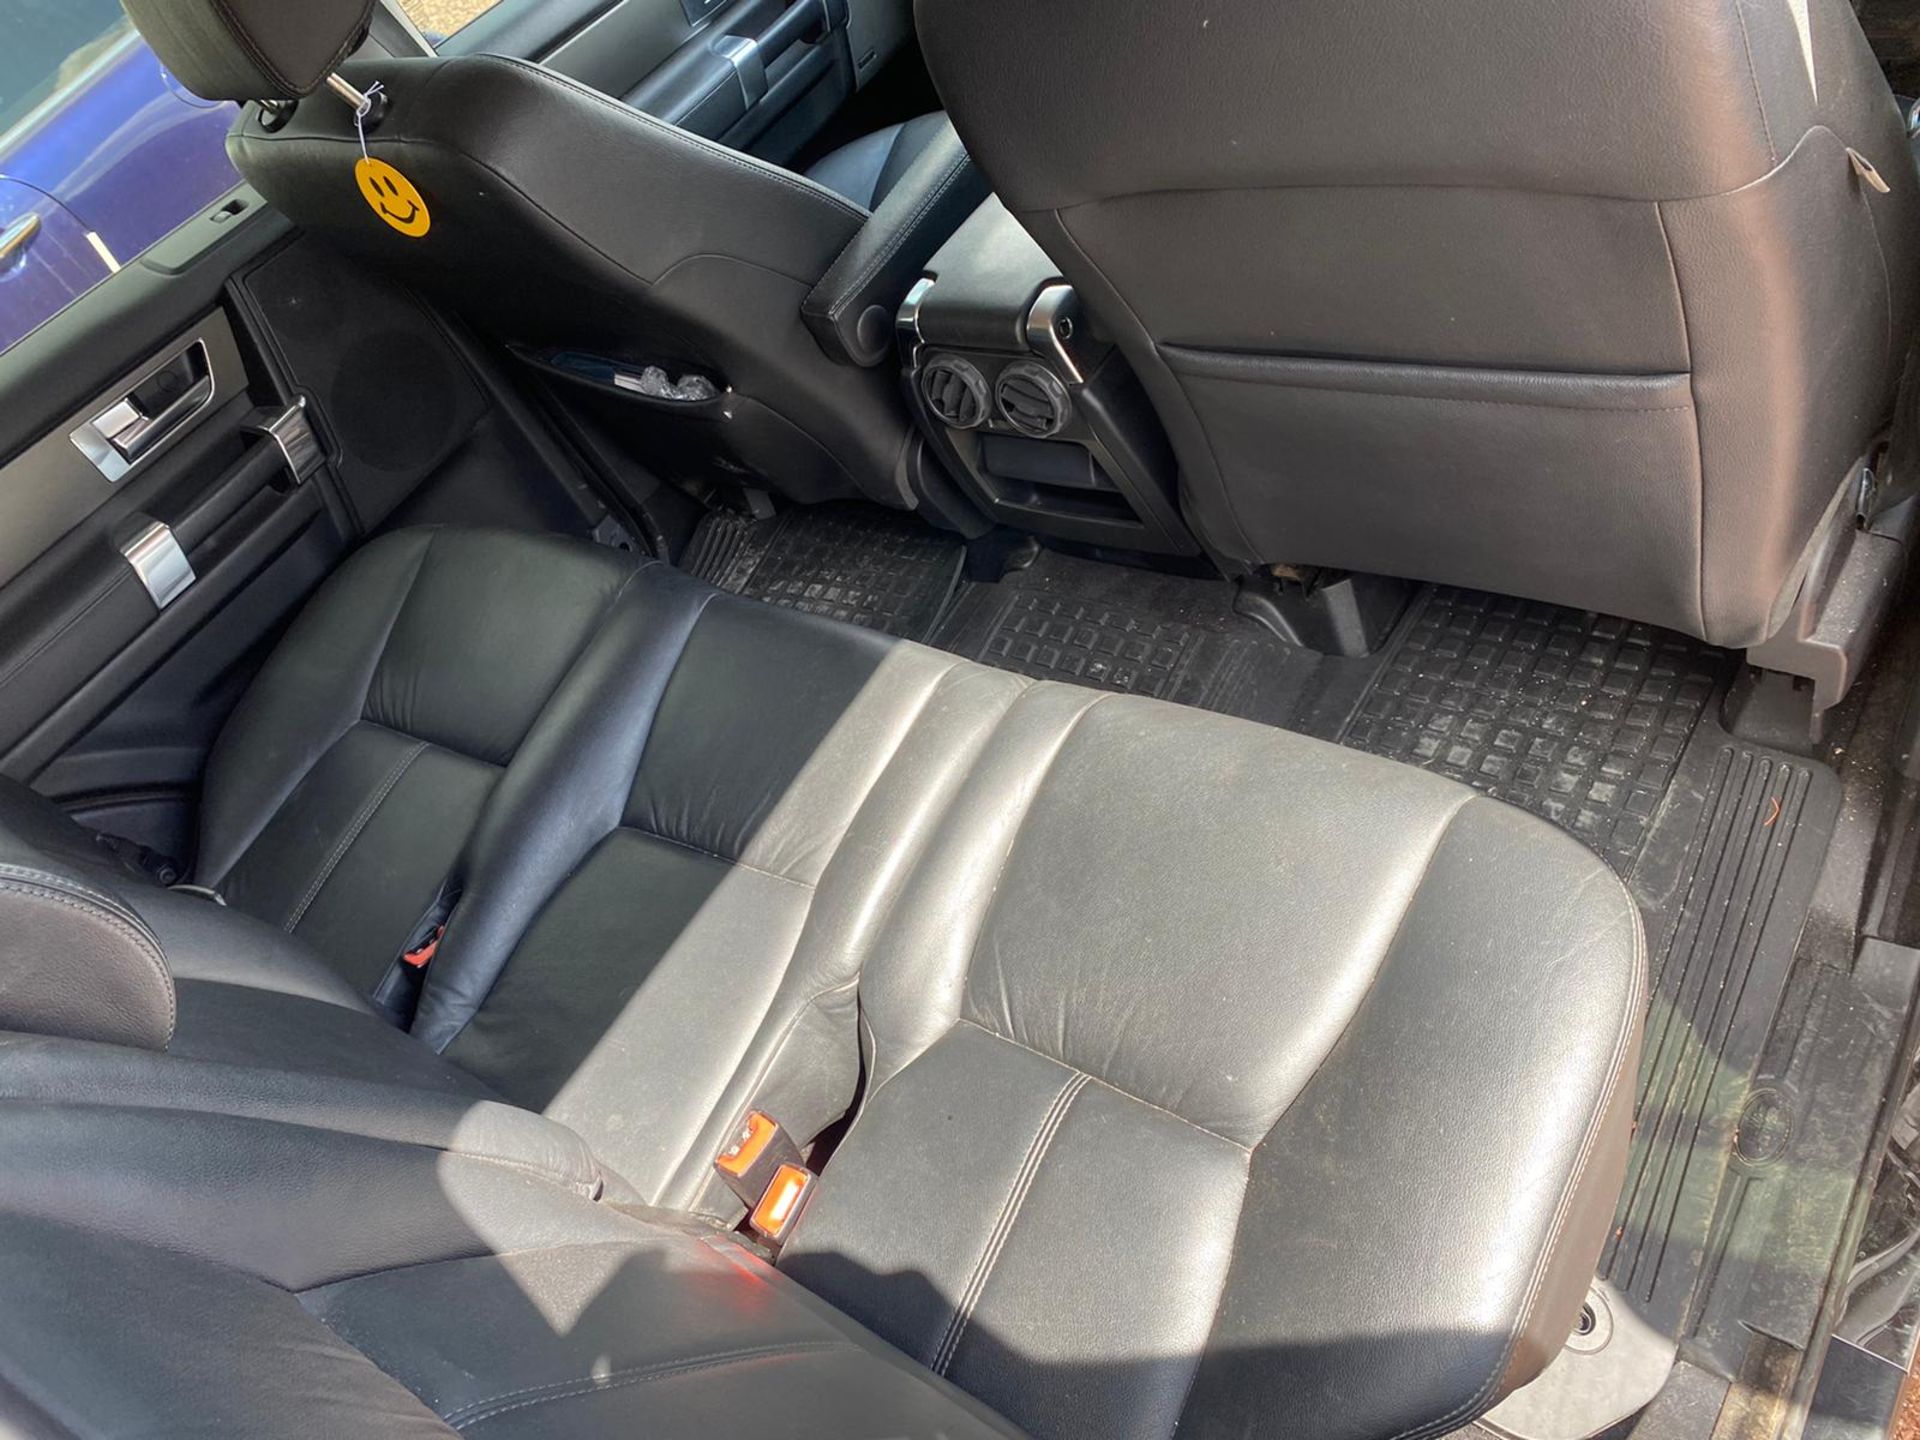 2015 LAND ROVER DISCOVERY XS SDV6 AUTO BLACK CONVERTED COMMERCIAL – WITH REAR SEAT CONVERSION - Image 11 of 13